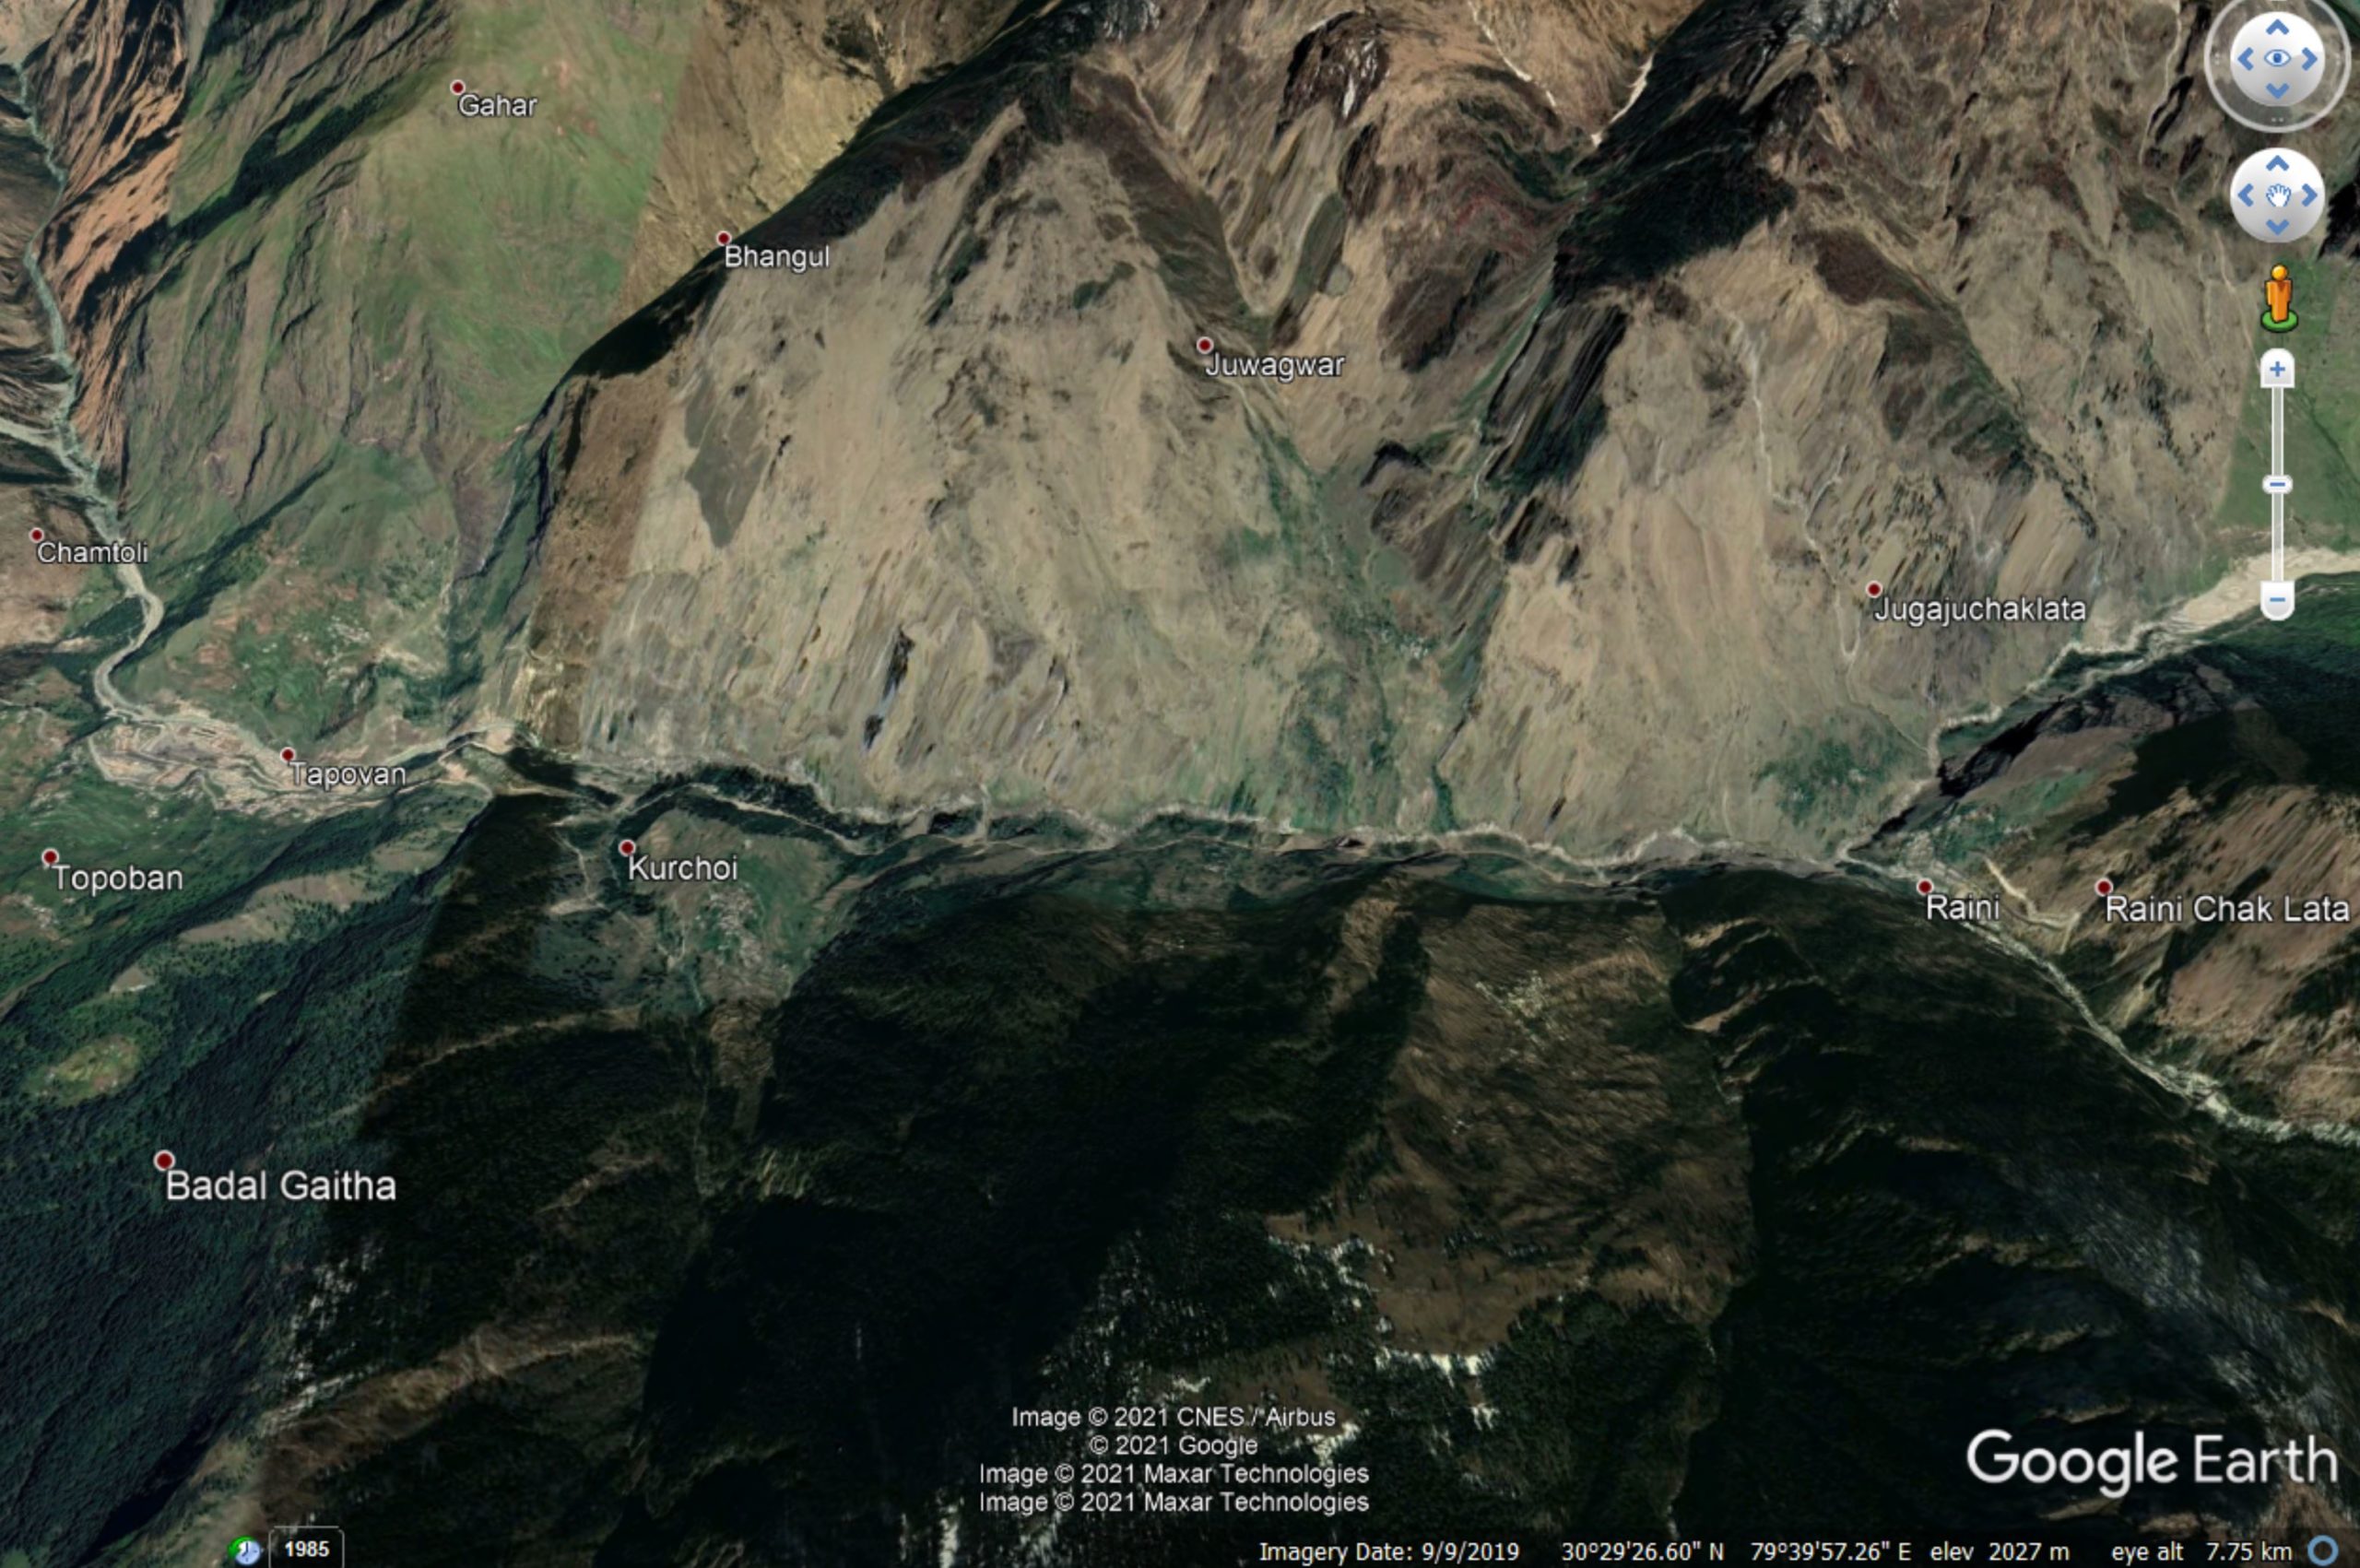 Google Earth image of the area affected by the catastrophic flood at Chamoli